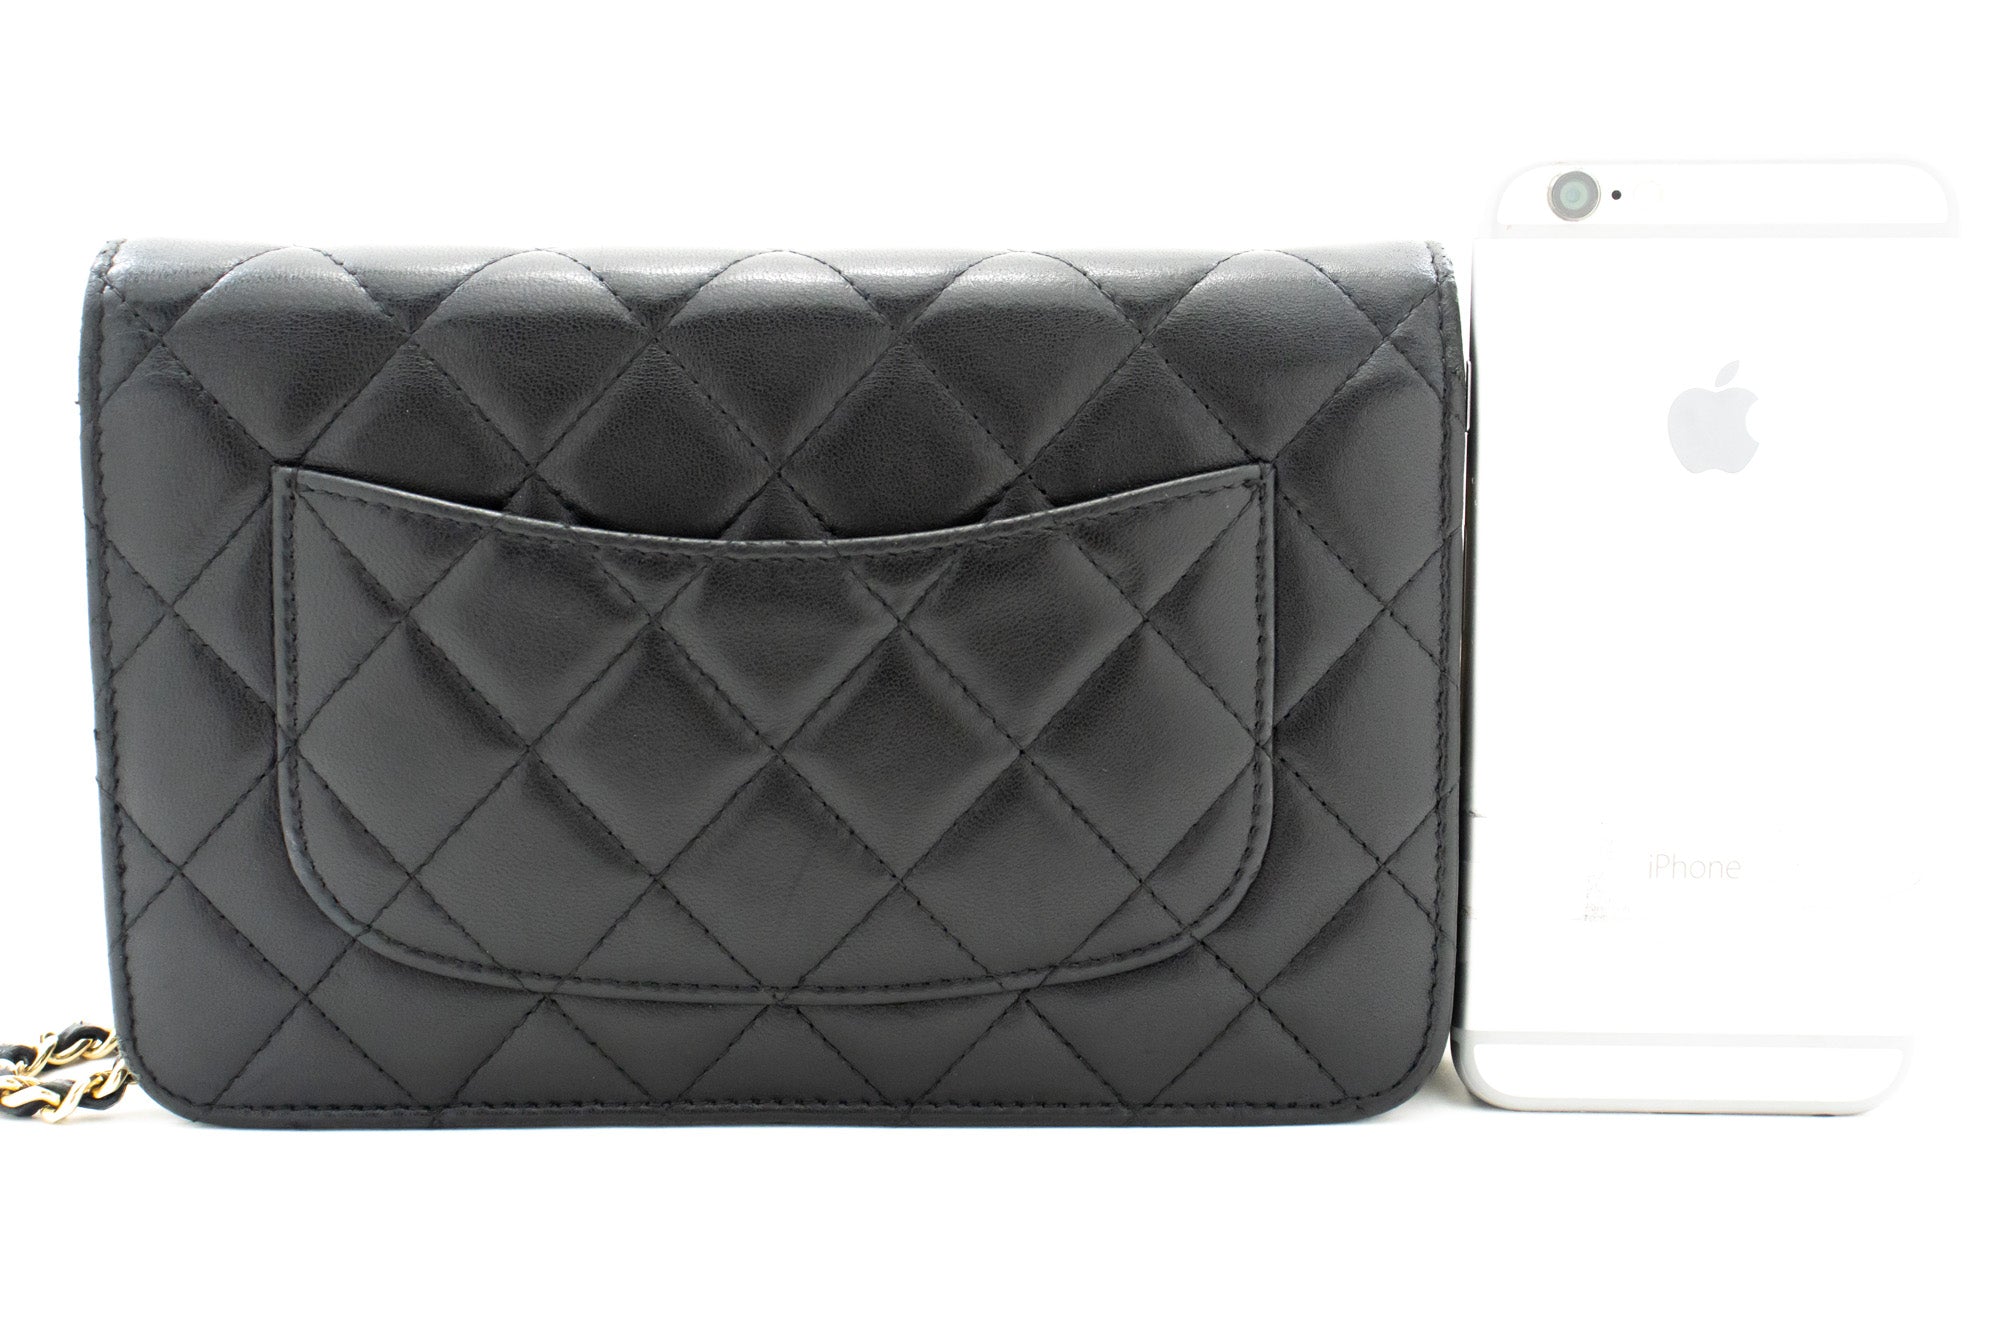 CHANEL Full Flap Chain Shoulder Bag Clutch Black Quilted Lambskin c18 